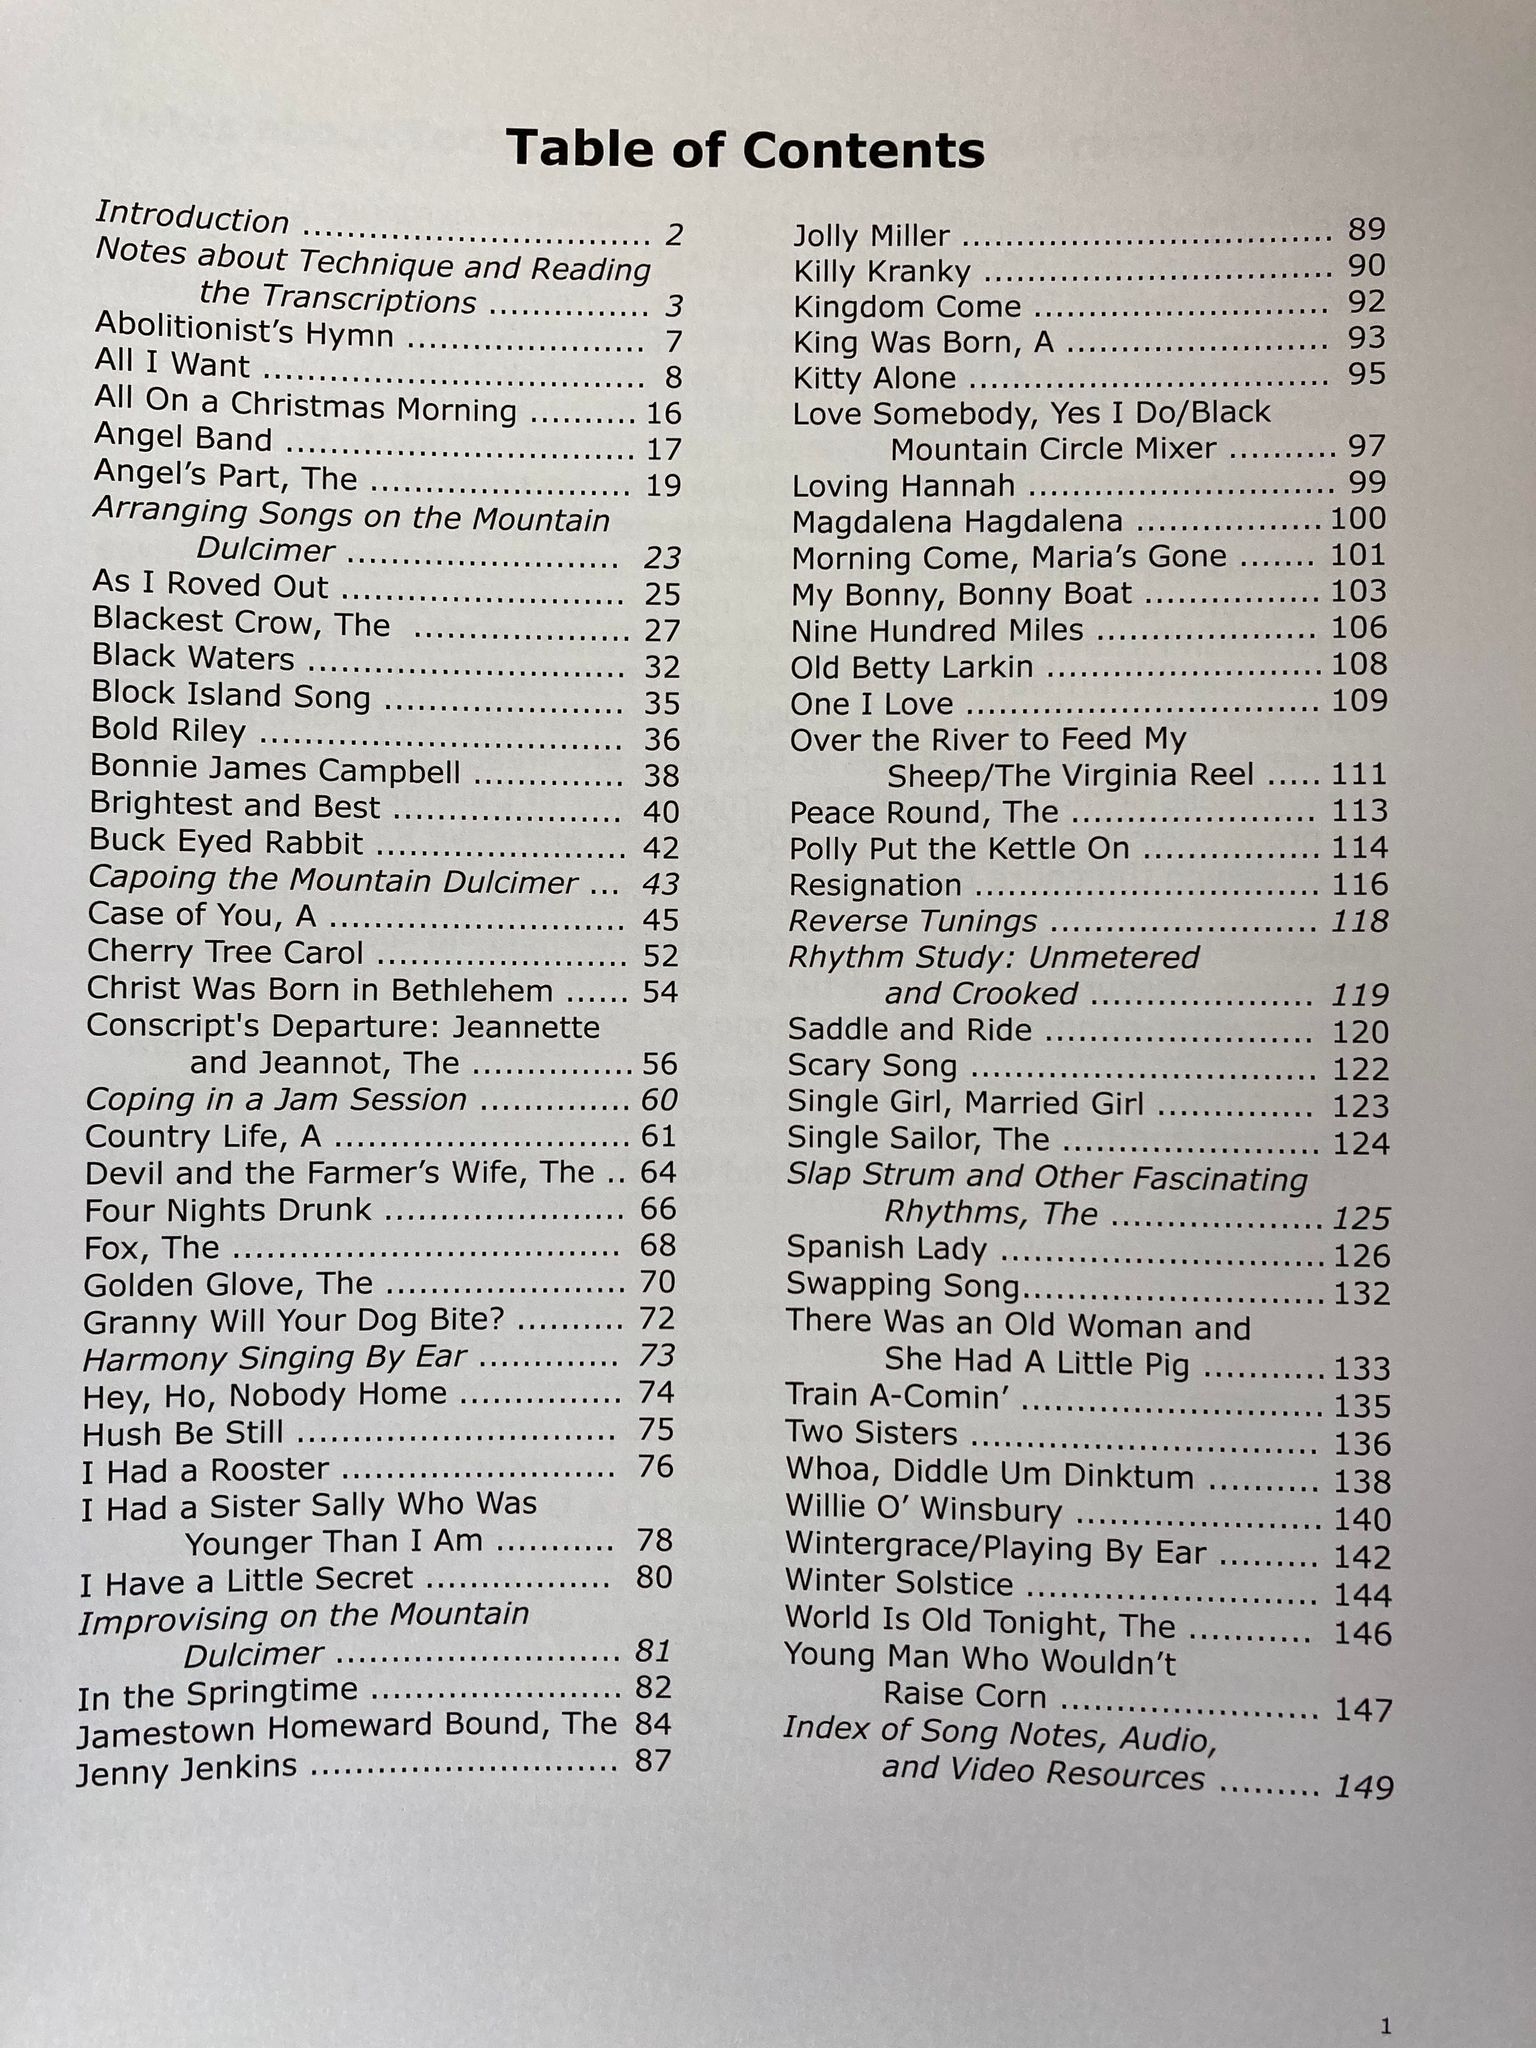 Table of contents showing chapter titles and page numbers for "Song by Song Vol 2" by Aubrey Atwater, a 130-page songbook on a white background.